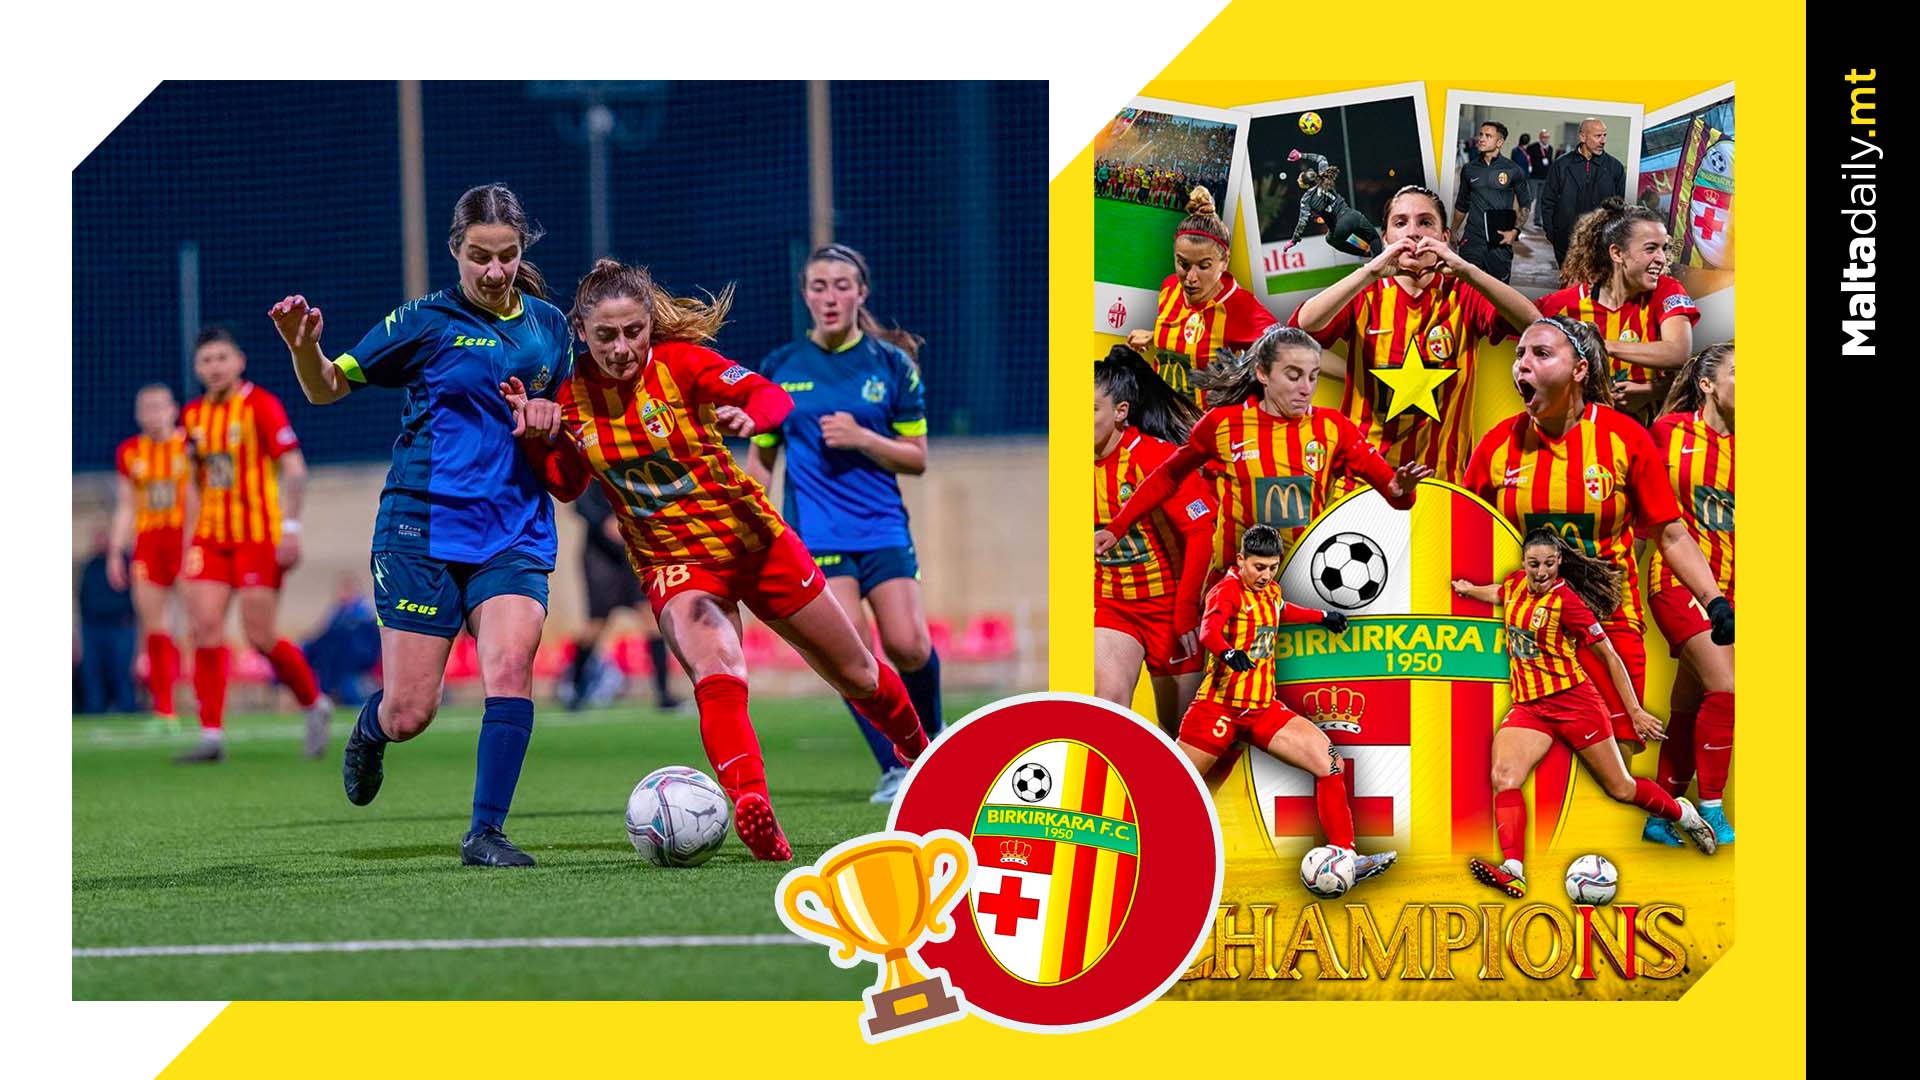 Birkirkara Women’s Team have mathematically become 11th time champions